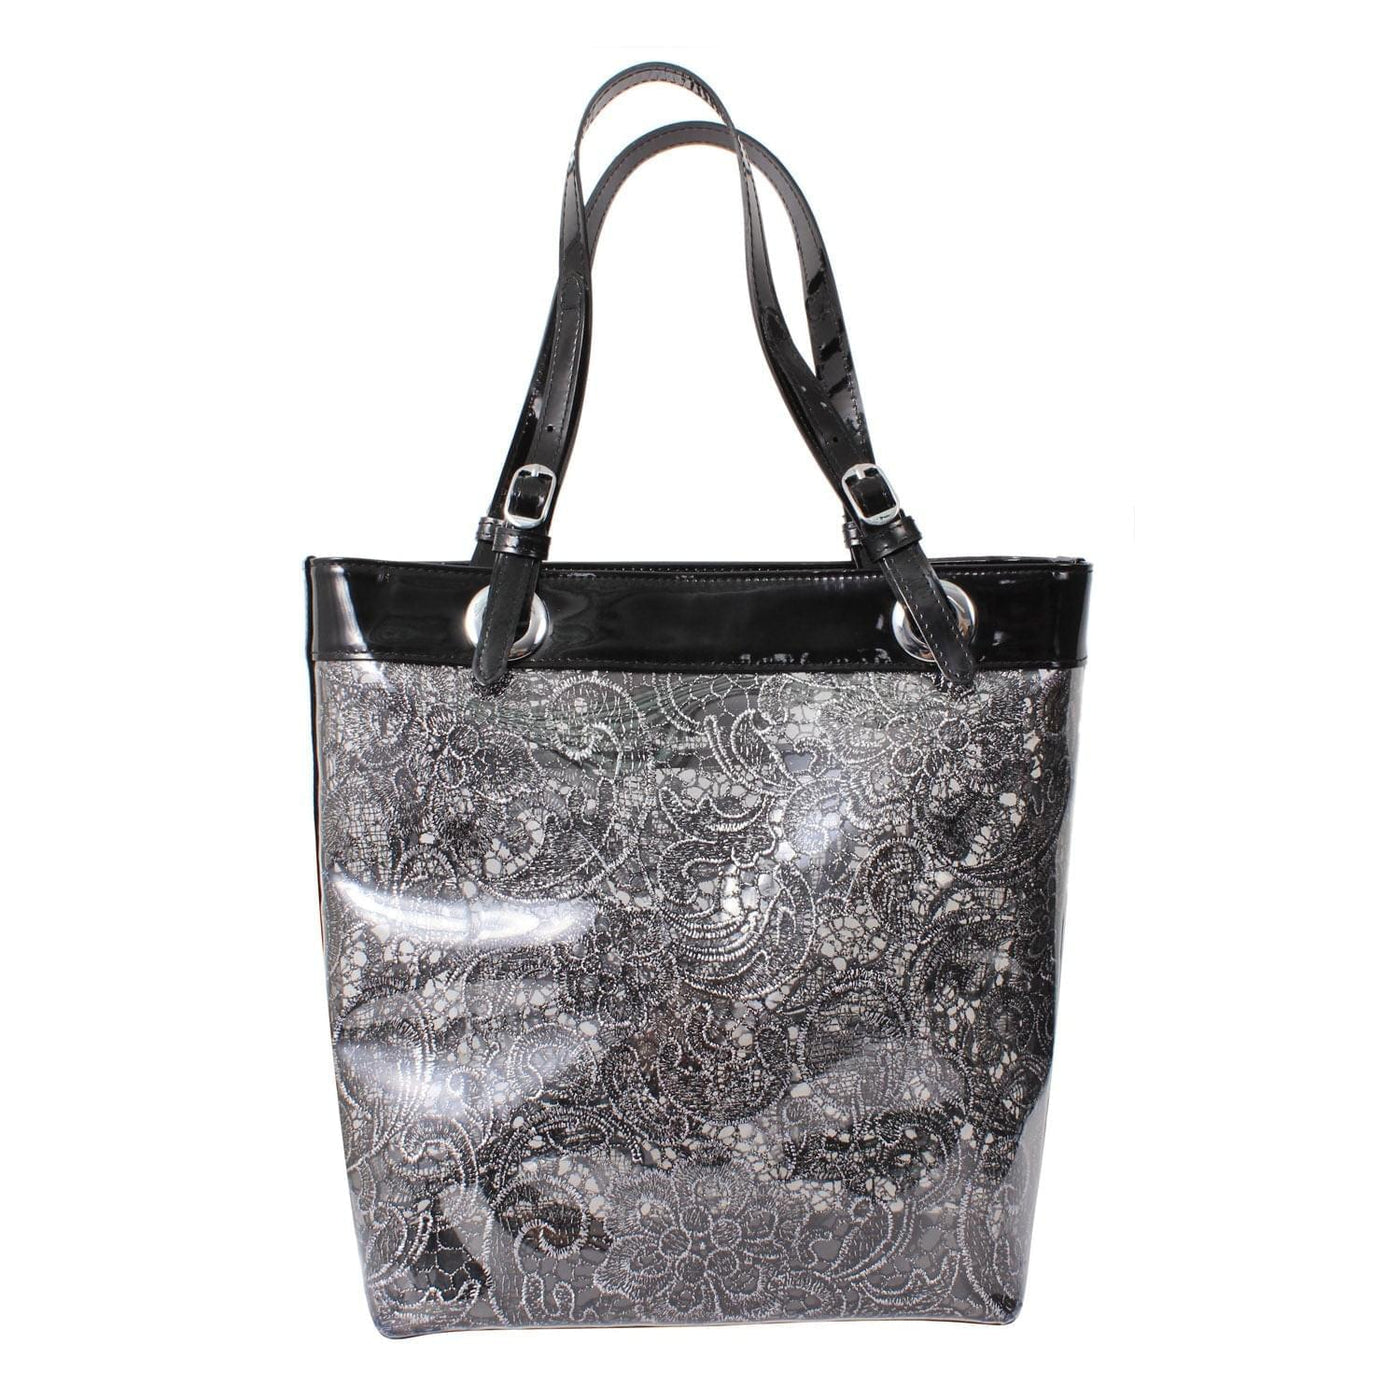 bFun Silver Tote - Women's tote bag for everyday use